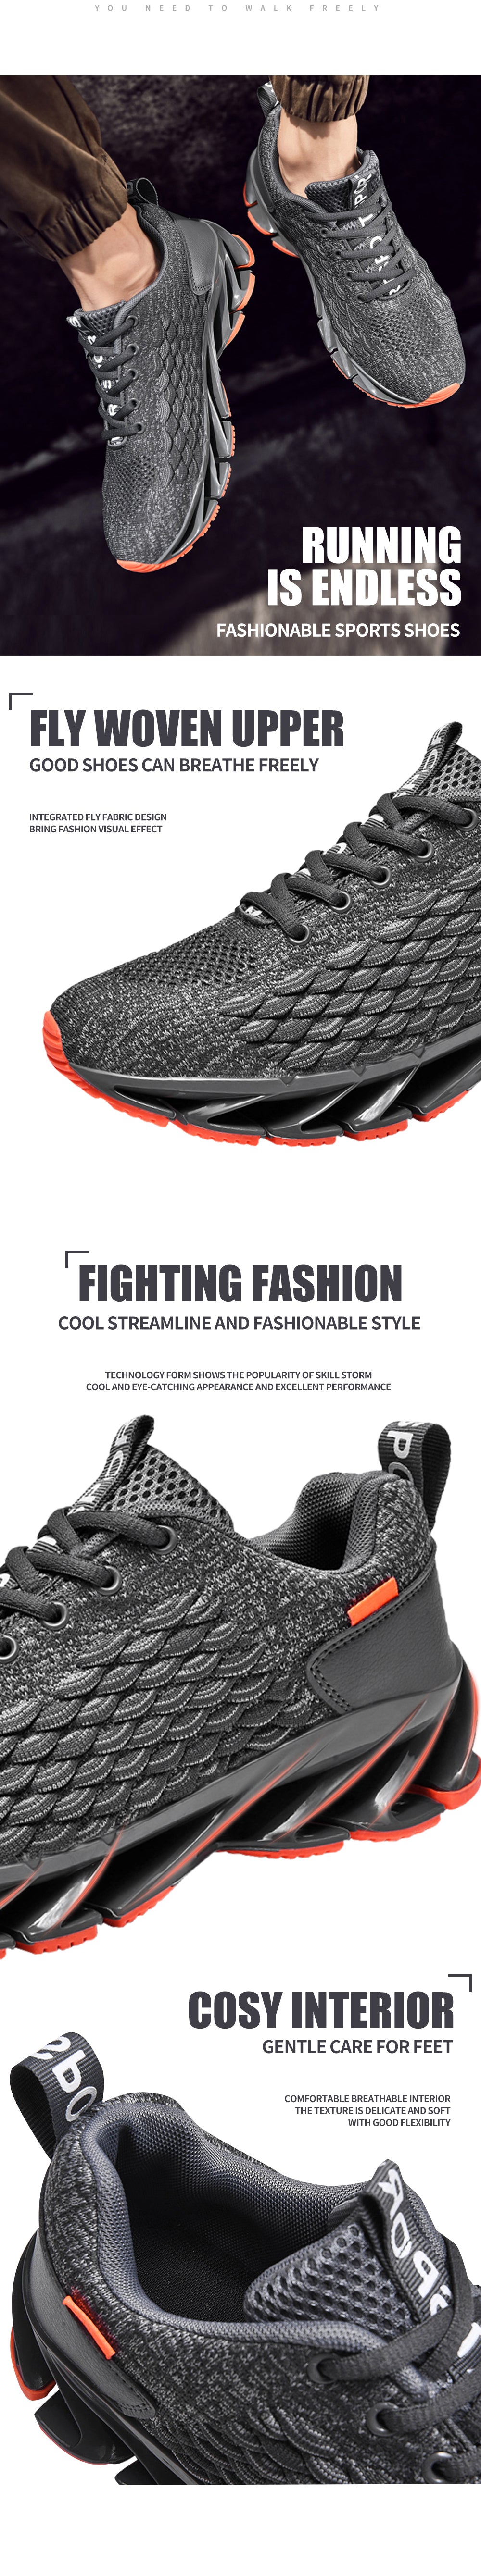 Men's Women's Shoes Breathable Mesh Running Shoes Outdoor Fitness Training Sports Shoes Non-slip Wear-resistant Sneakers The Clothing Company Sydney